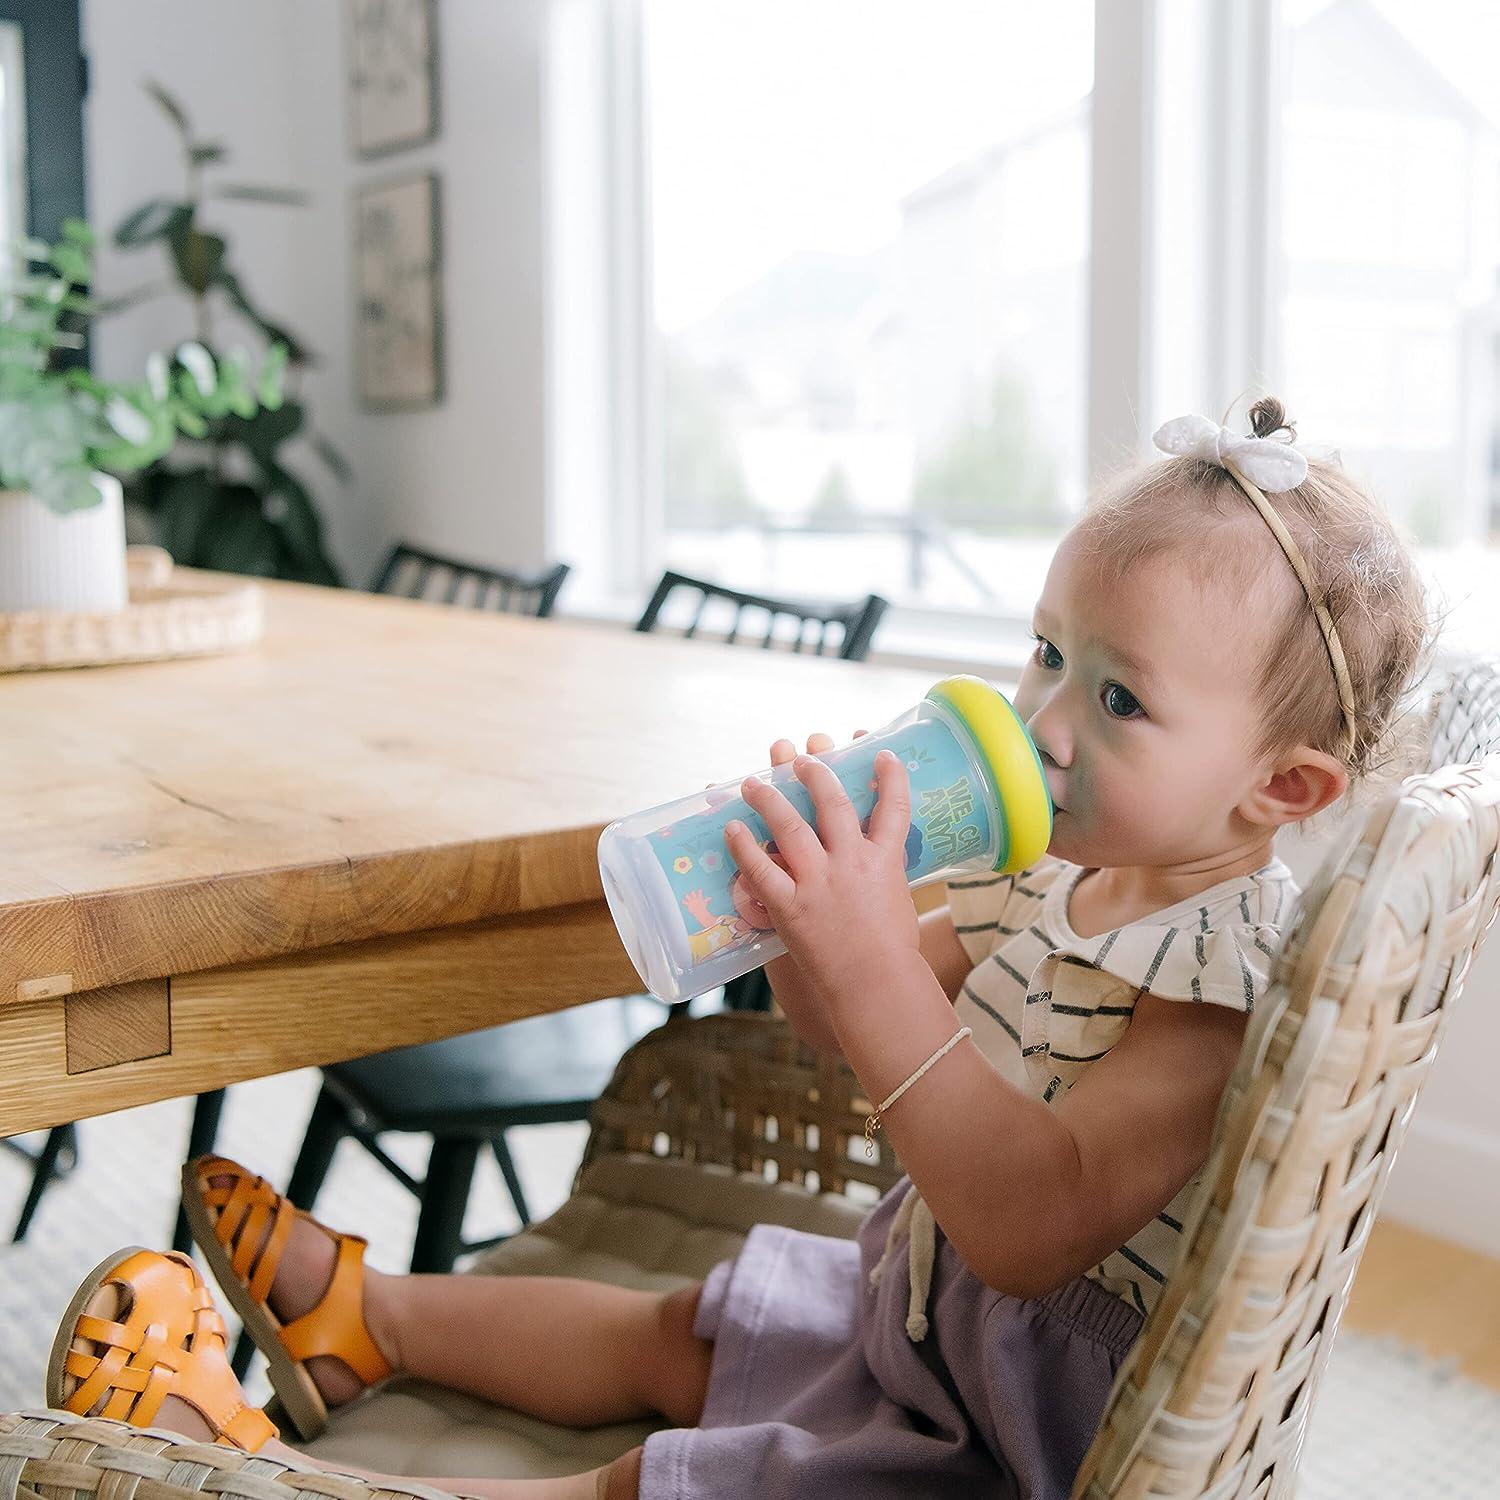 The First Years Chill & Sip Cocomelon Kids Water Bottle - Insulated Toddler  Straw Cups with Flip Top…See more The First Years Chill & Sip Cocomelon